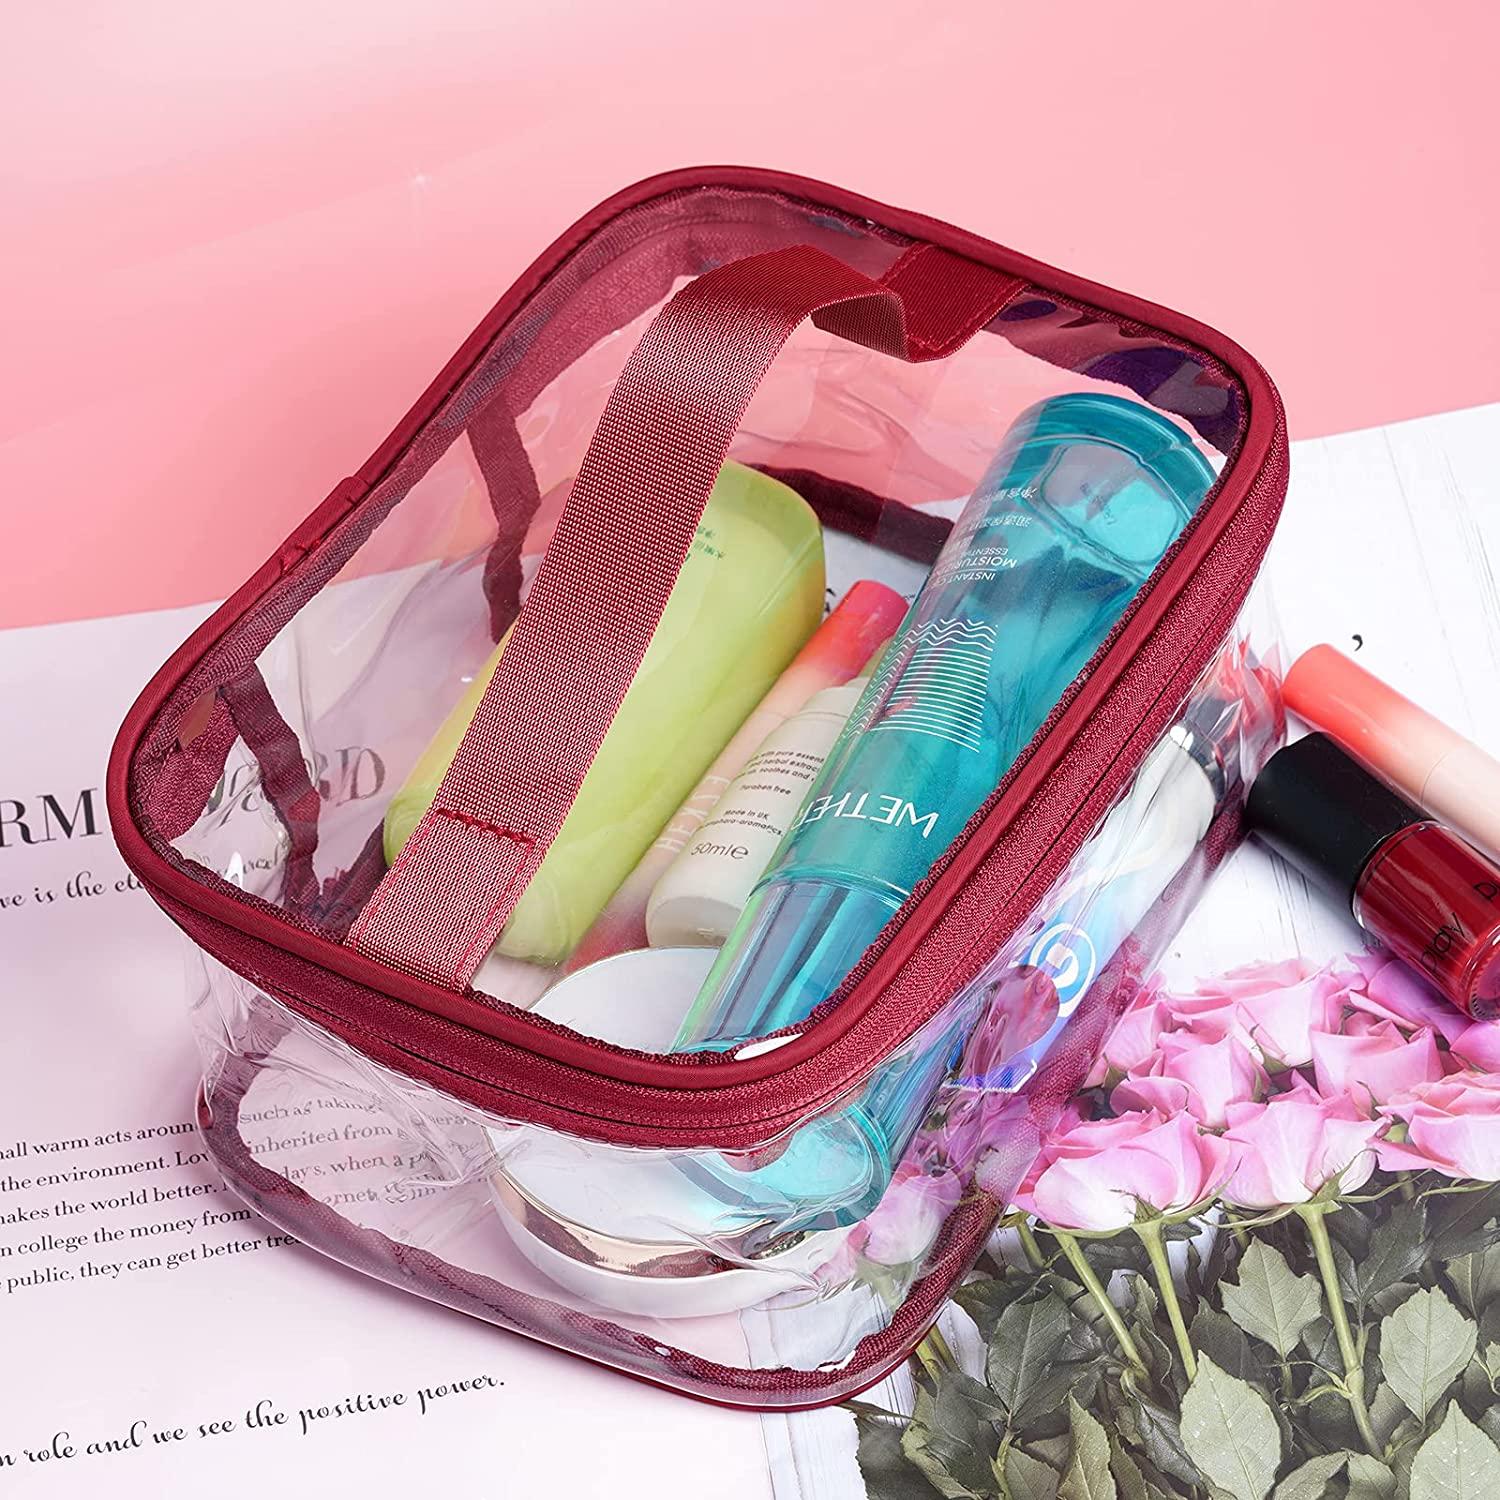 Red Zipper Mini Travel Toiletry Pouch Bag